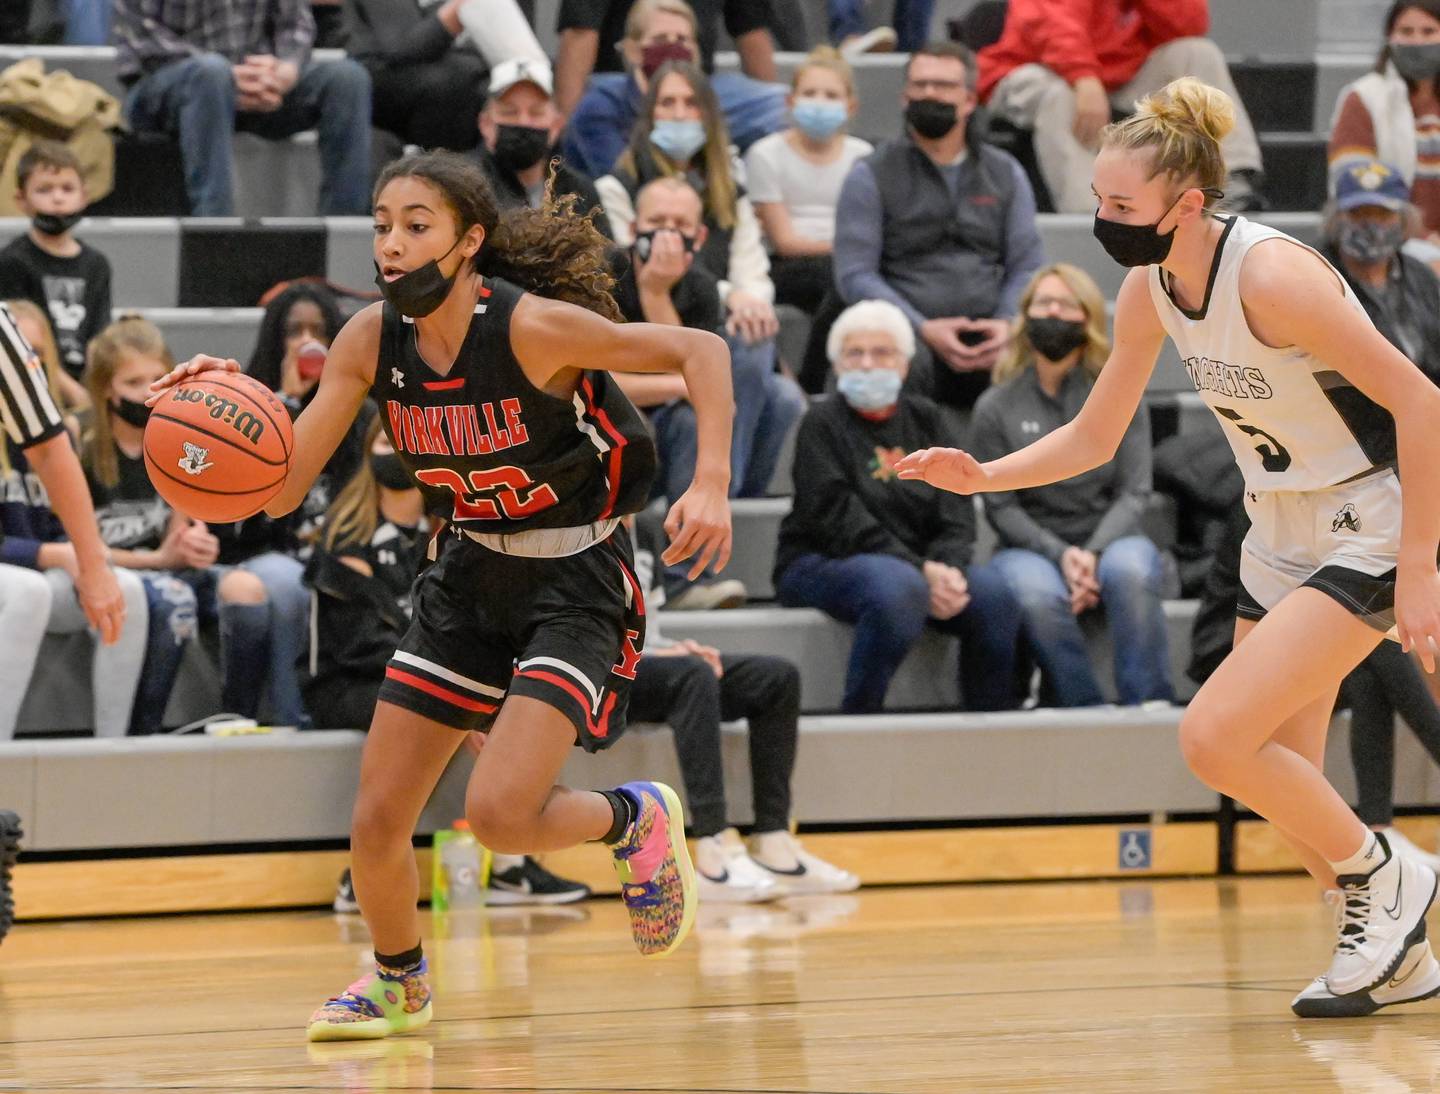 Yorkville's Alex Stewart (22) drives the ball down the court past Kaneland's Taylor Seaton (5) during a game in Maple Park on Wednesday, December 15, 2021.